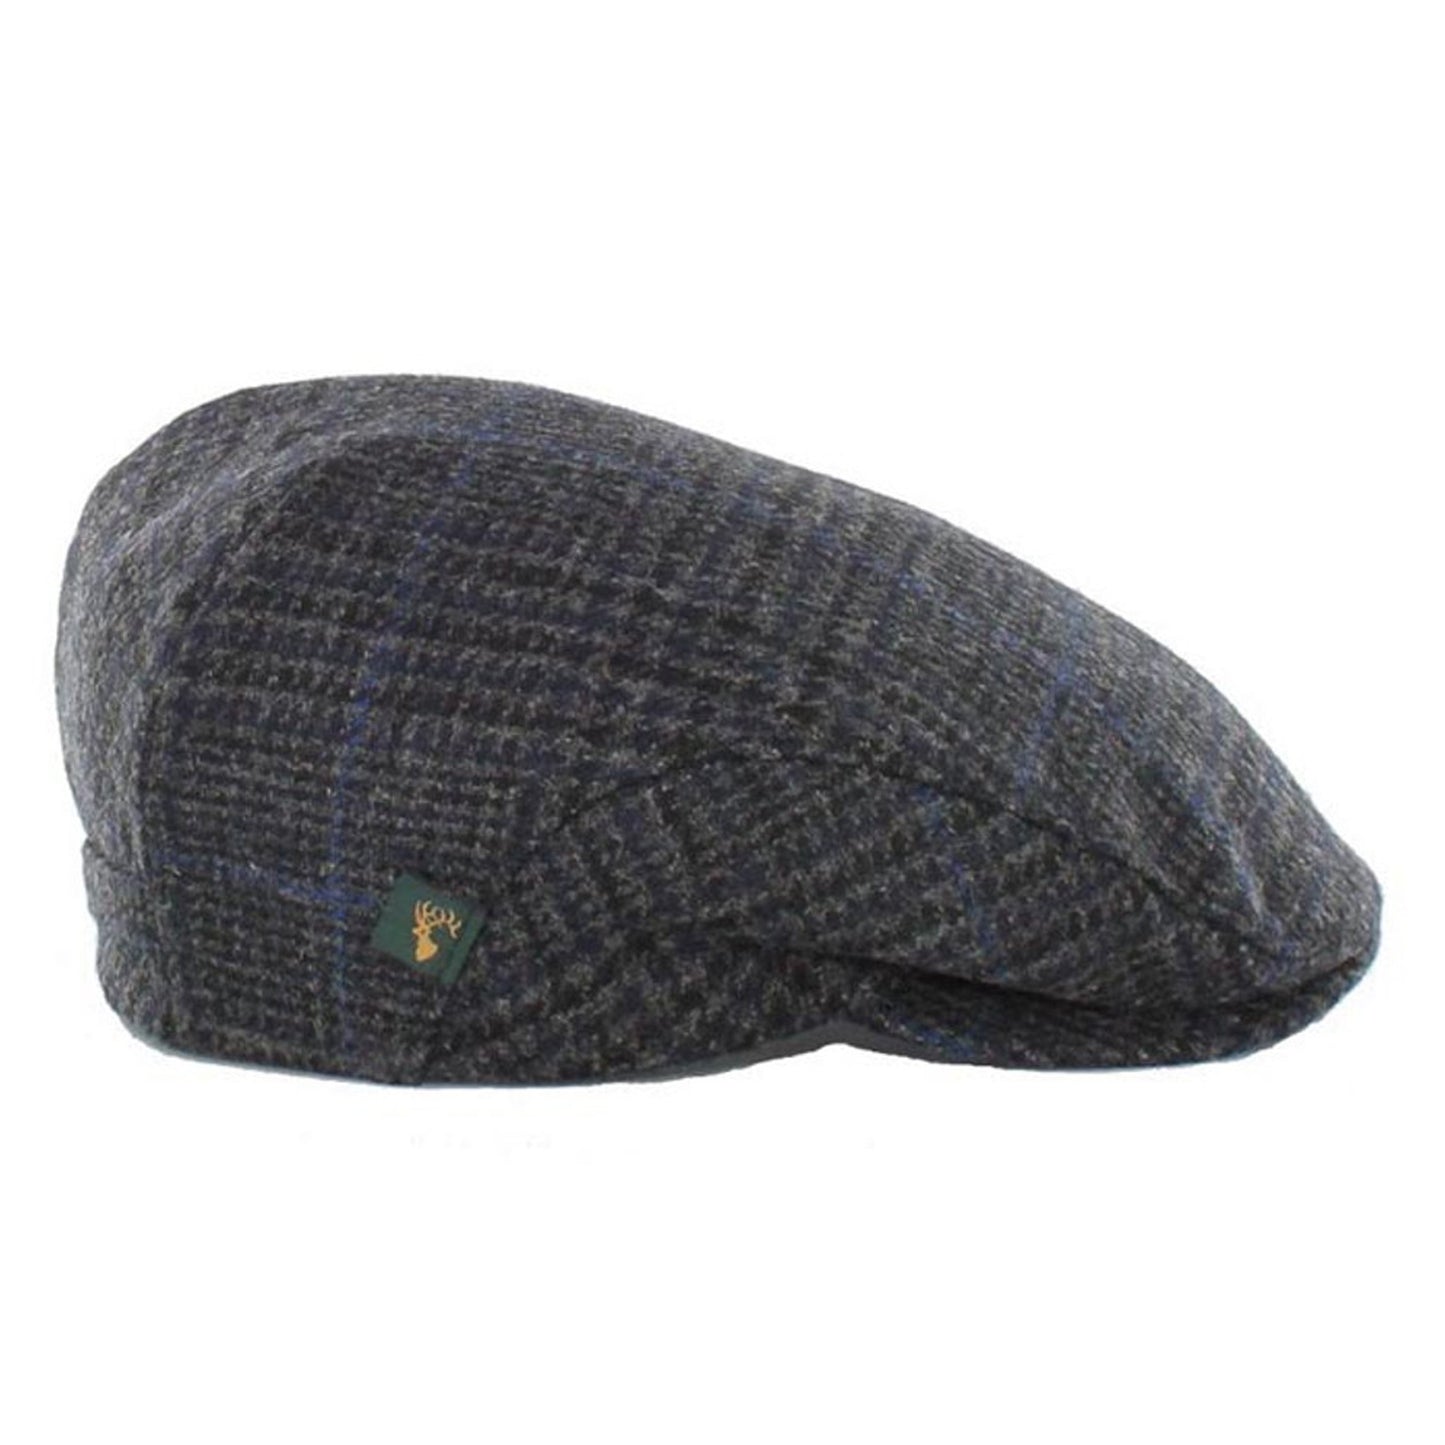 Trinity Tweed Flat Cap - Charcoal with Blue 434-1